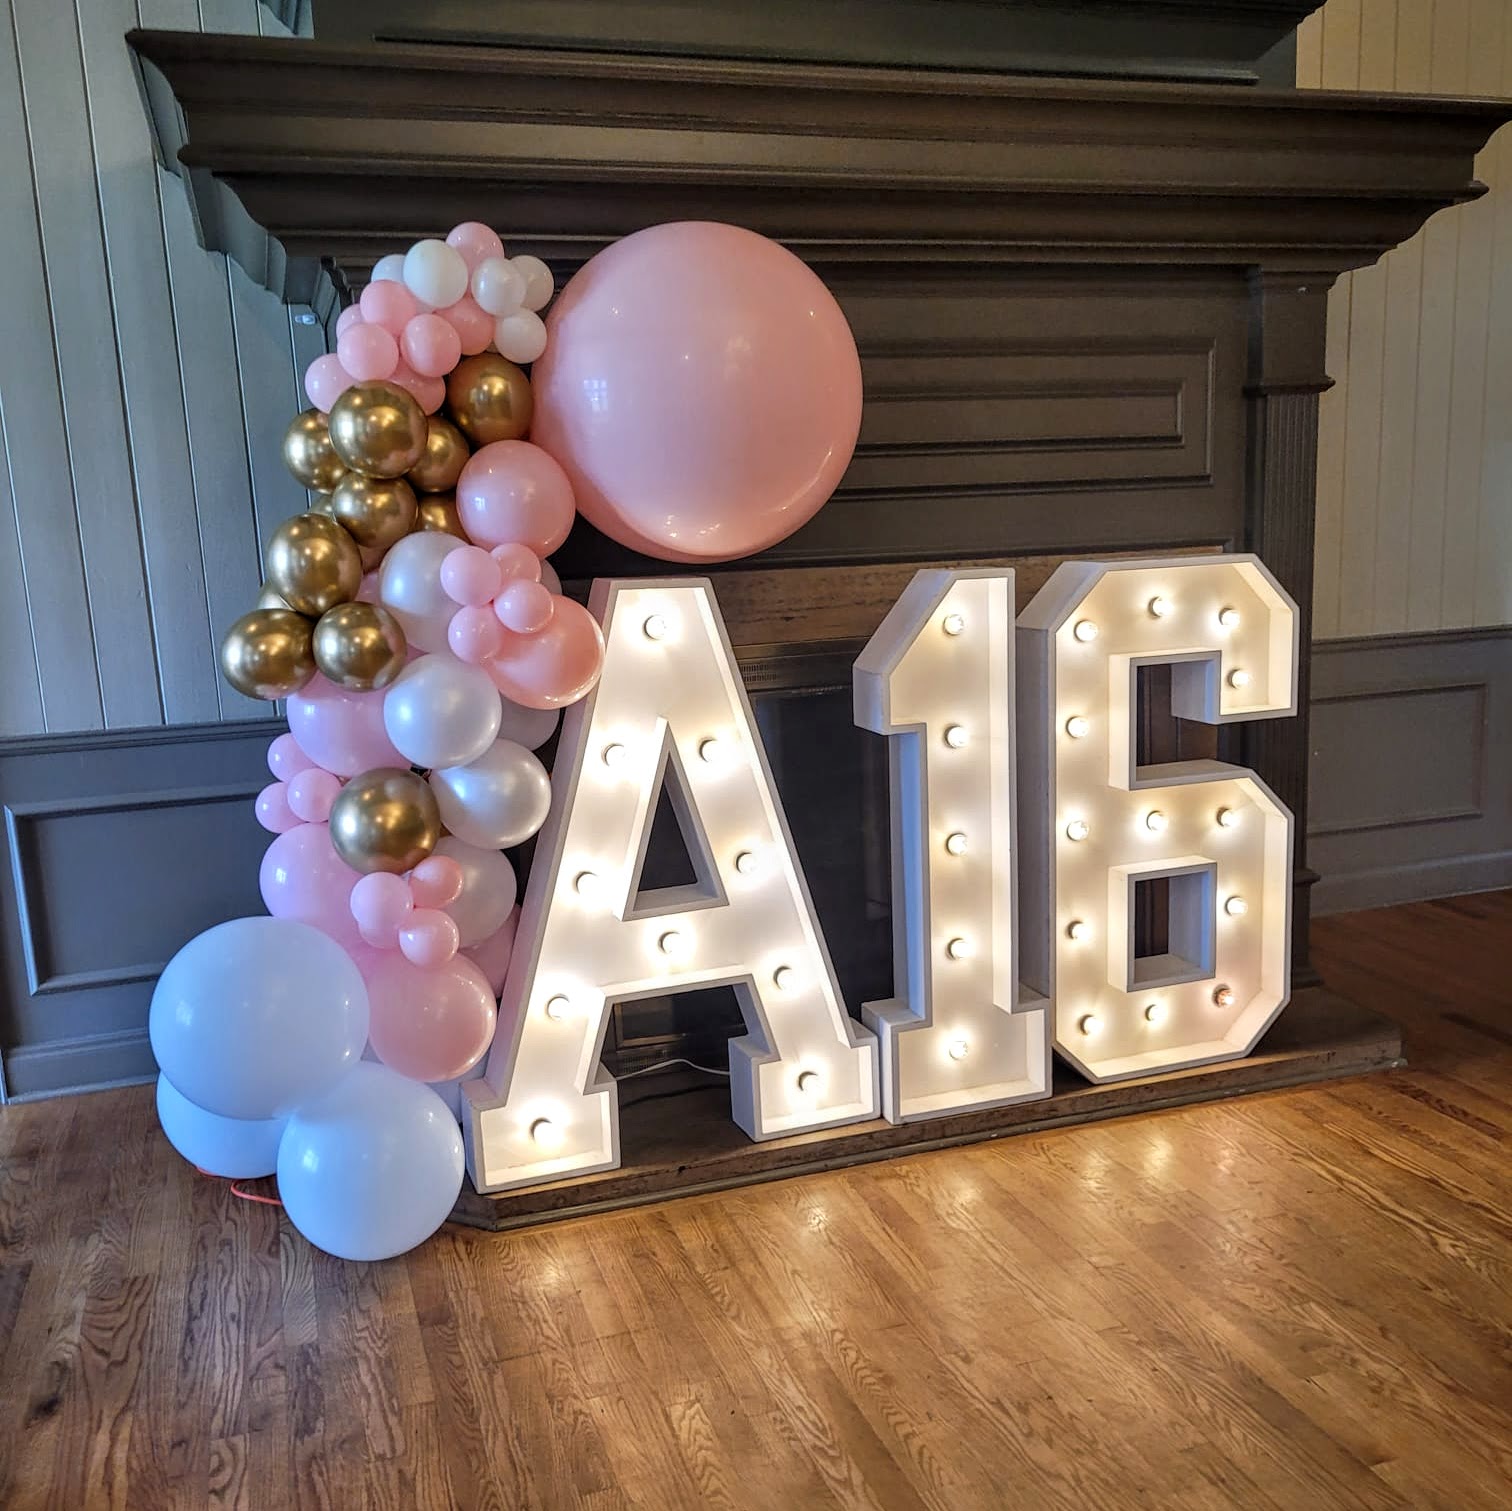 Kingston Marquee Letters Rental Company